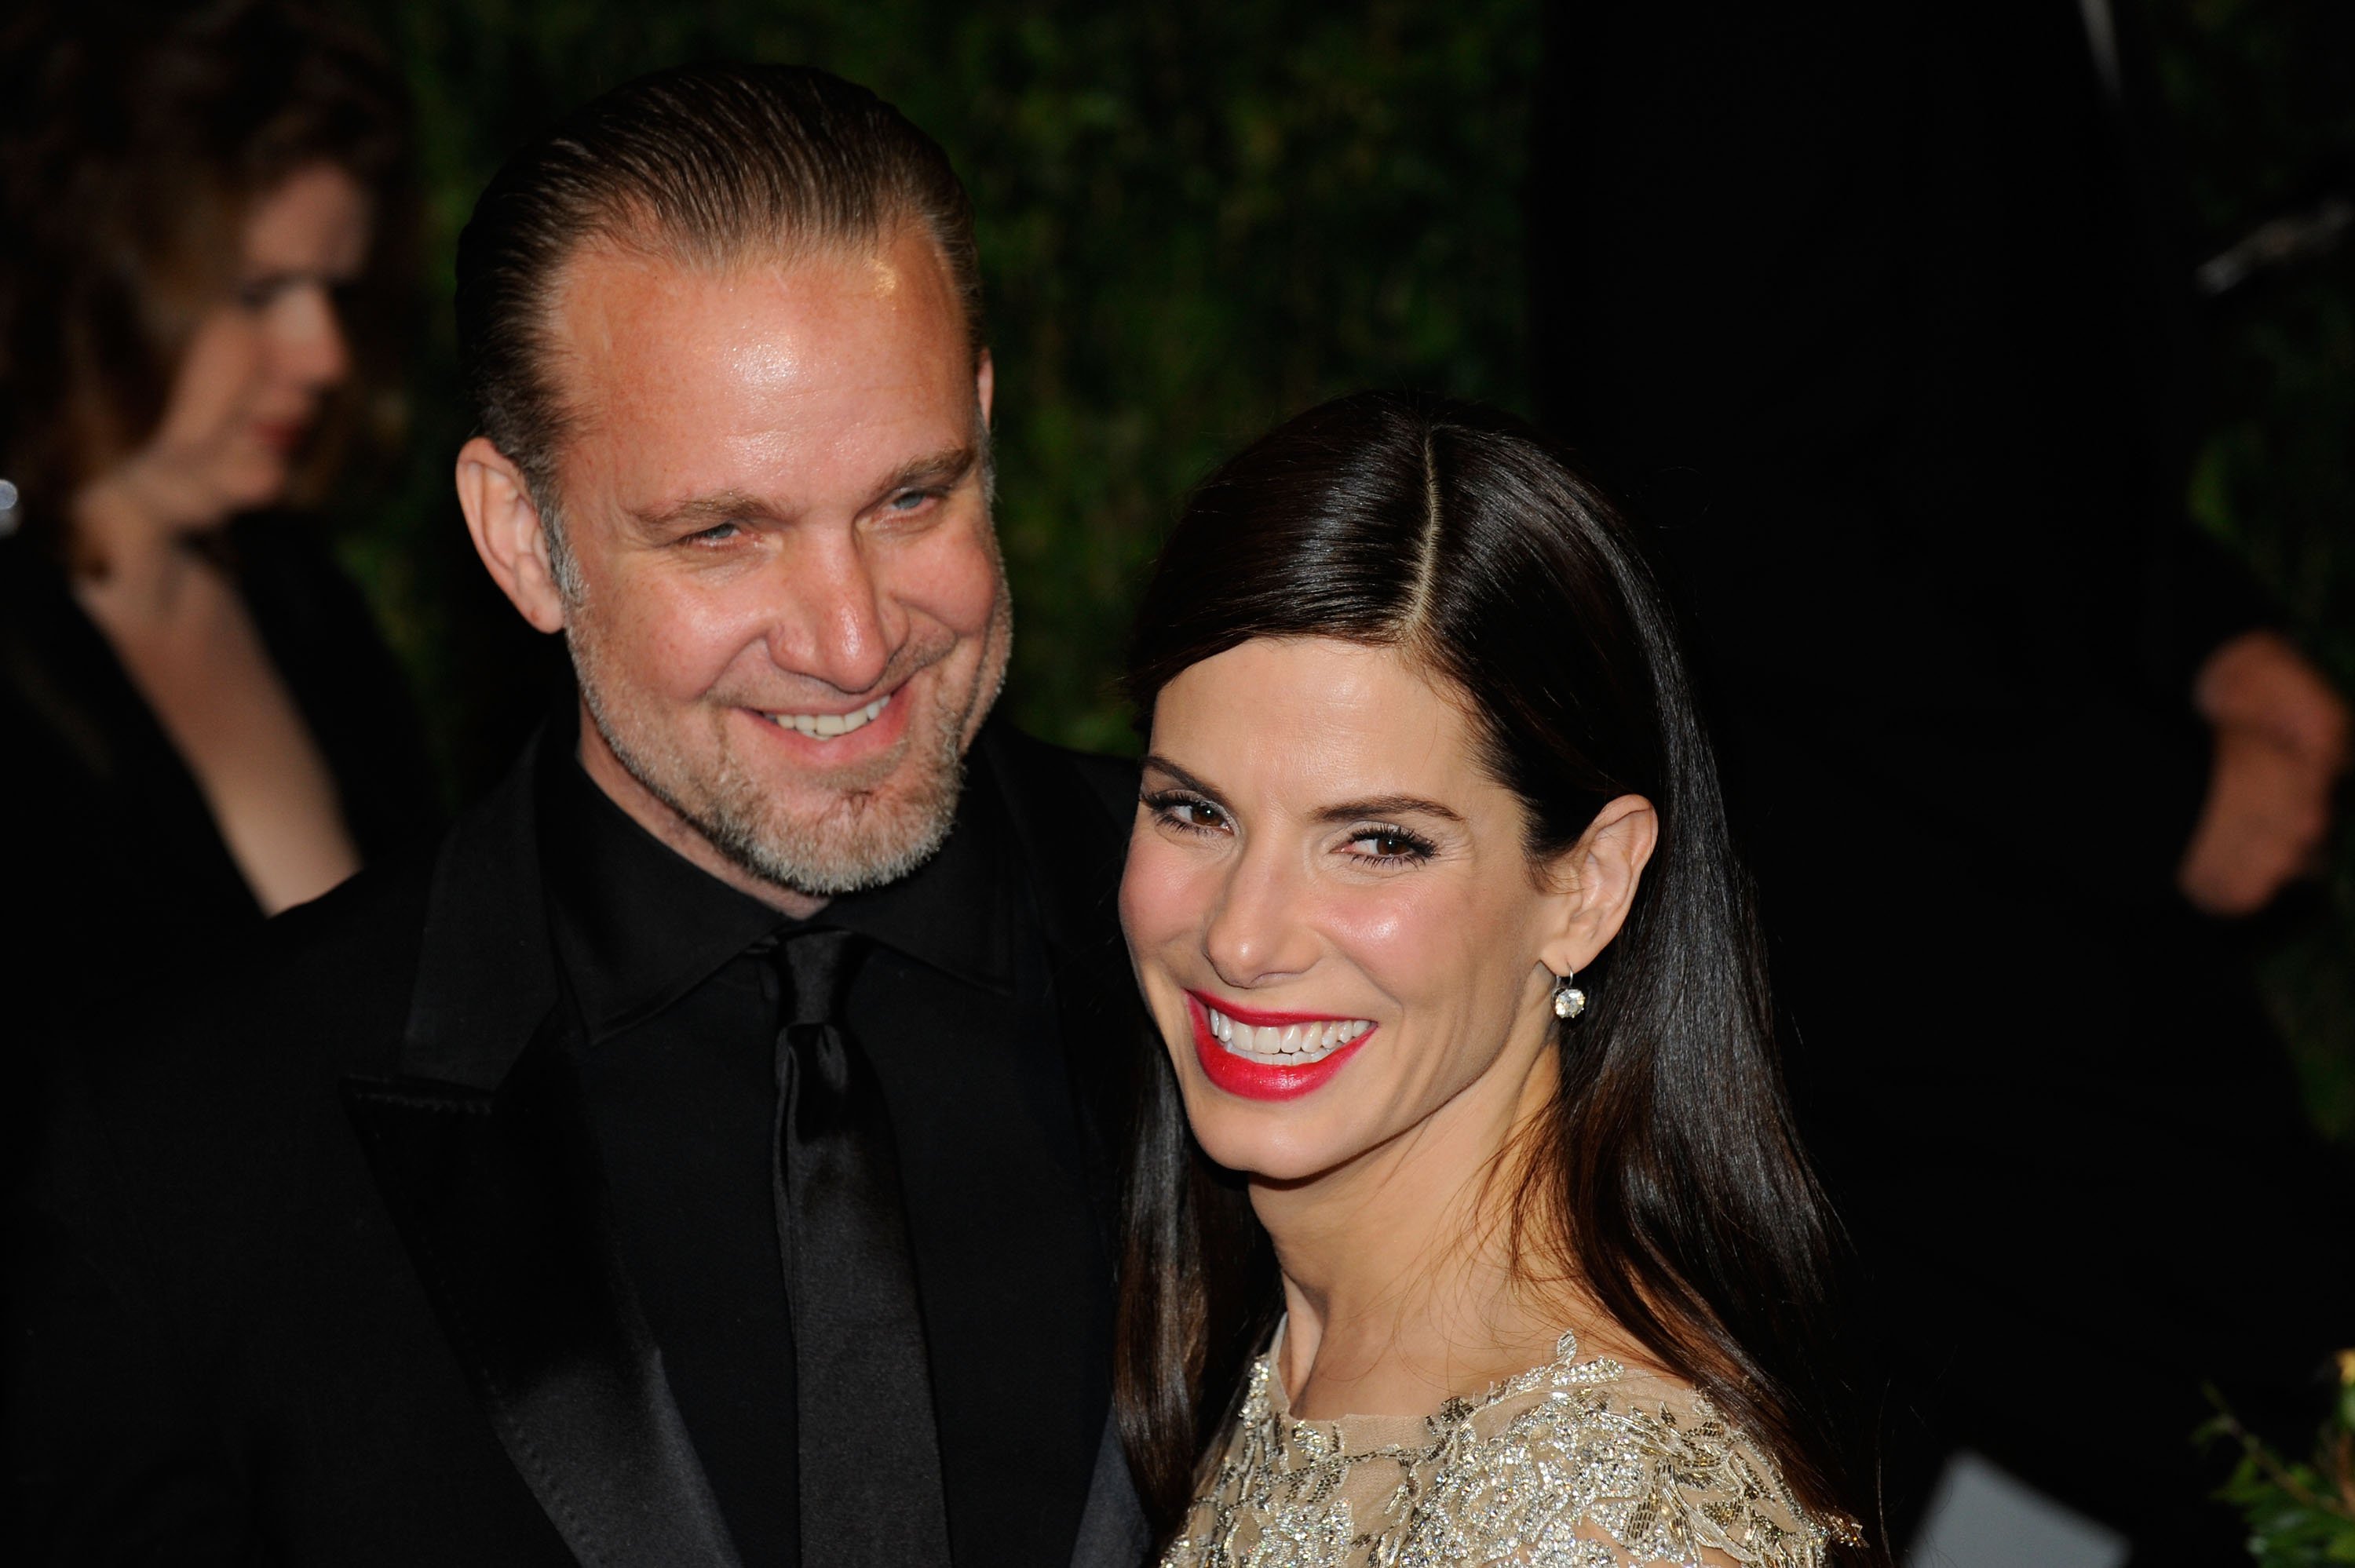 Jesse James and Sandra Bullock at the 2010 Vanity Fair Oscar Party on March 7, 2010 | Source: Getty Images